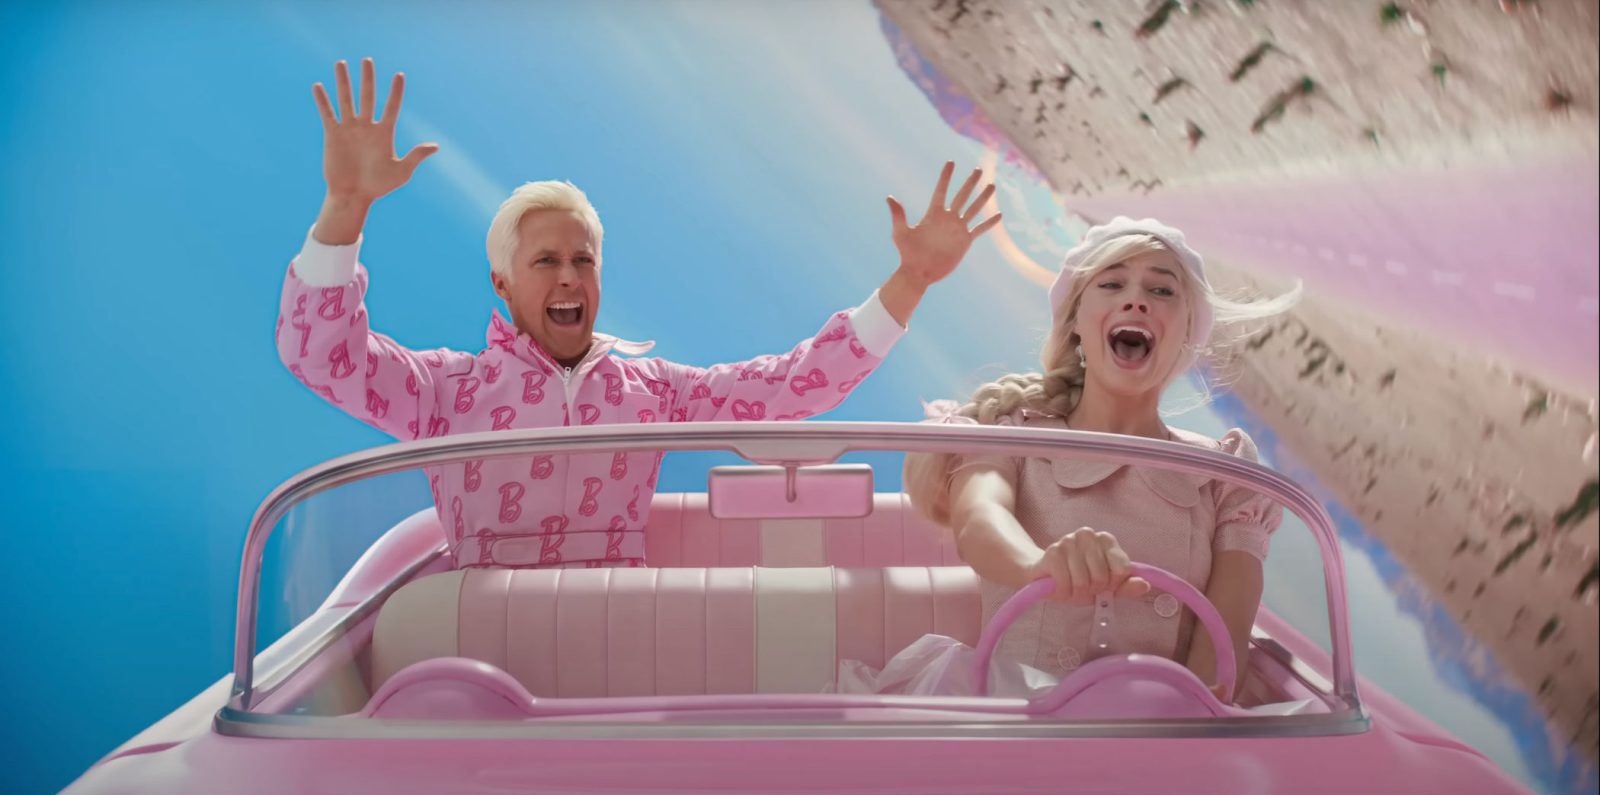 ‘Barbie’ movie trailer: A pretty pink ride packed with A-list cast members